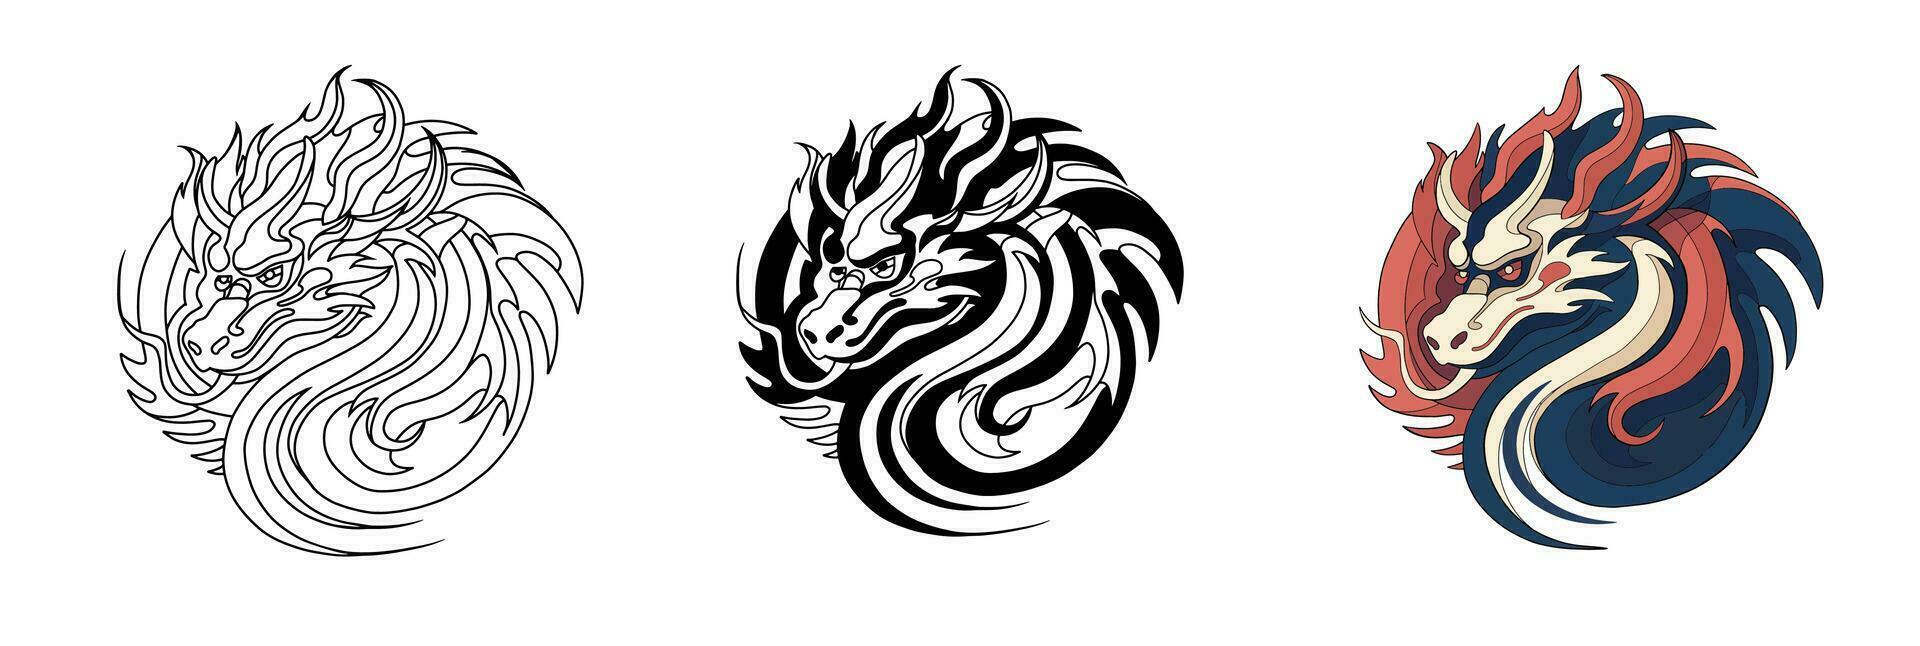 Chinese New Year 2024, year of the Dragon. Chinese zodiac dragon in  flat modern style , isolated background vector, Translate Happy New Year vector